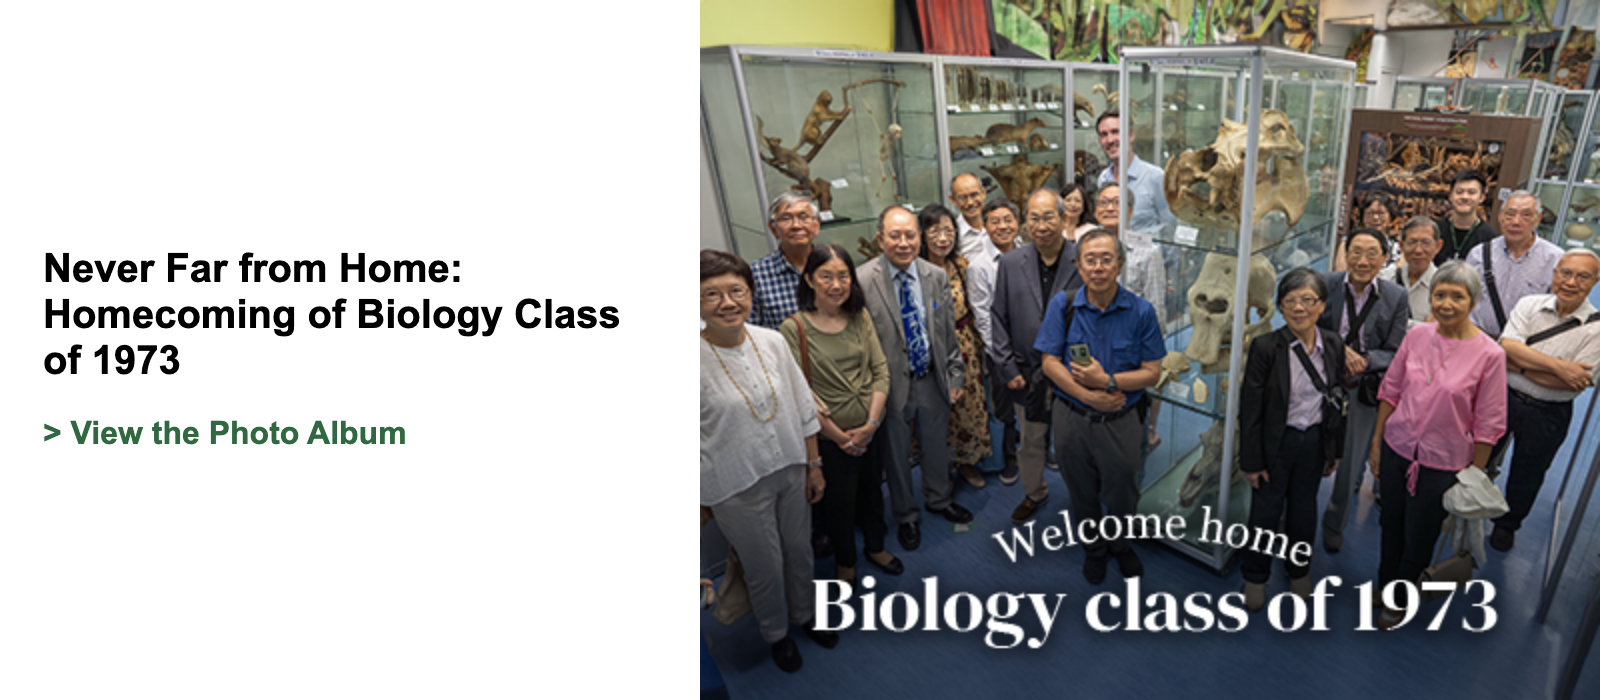 Never Far from Home: Homecoming of Biology Class of 1973